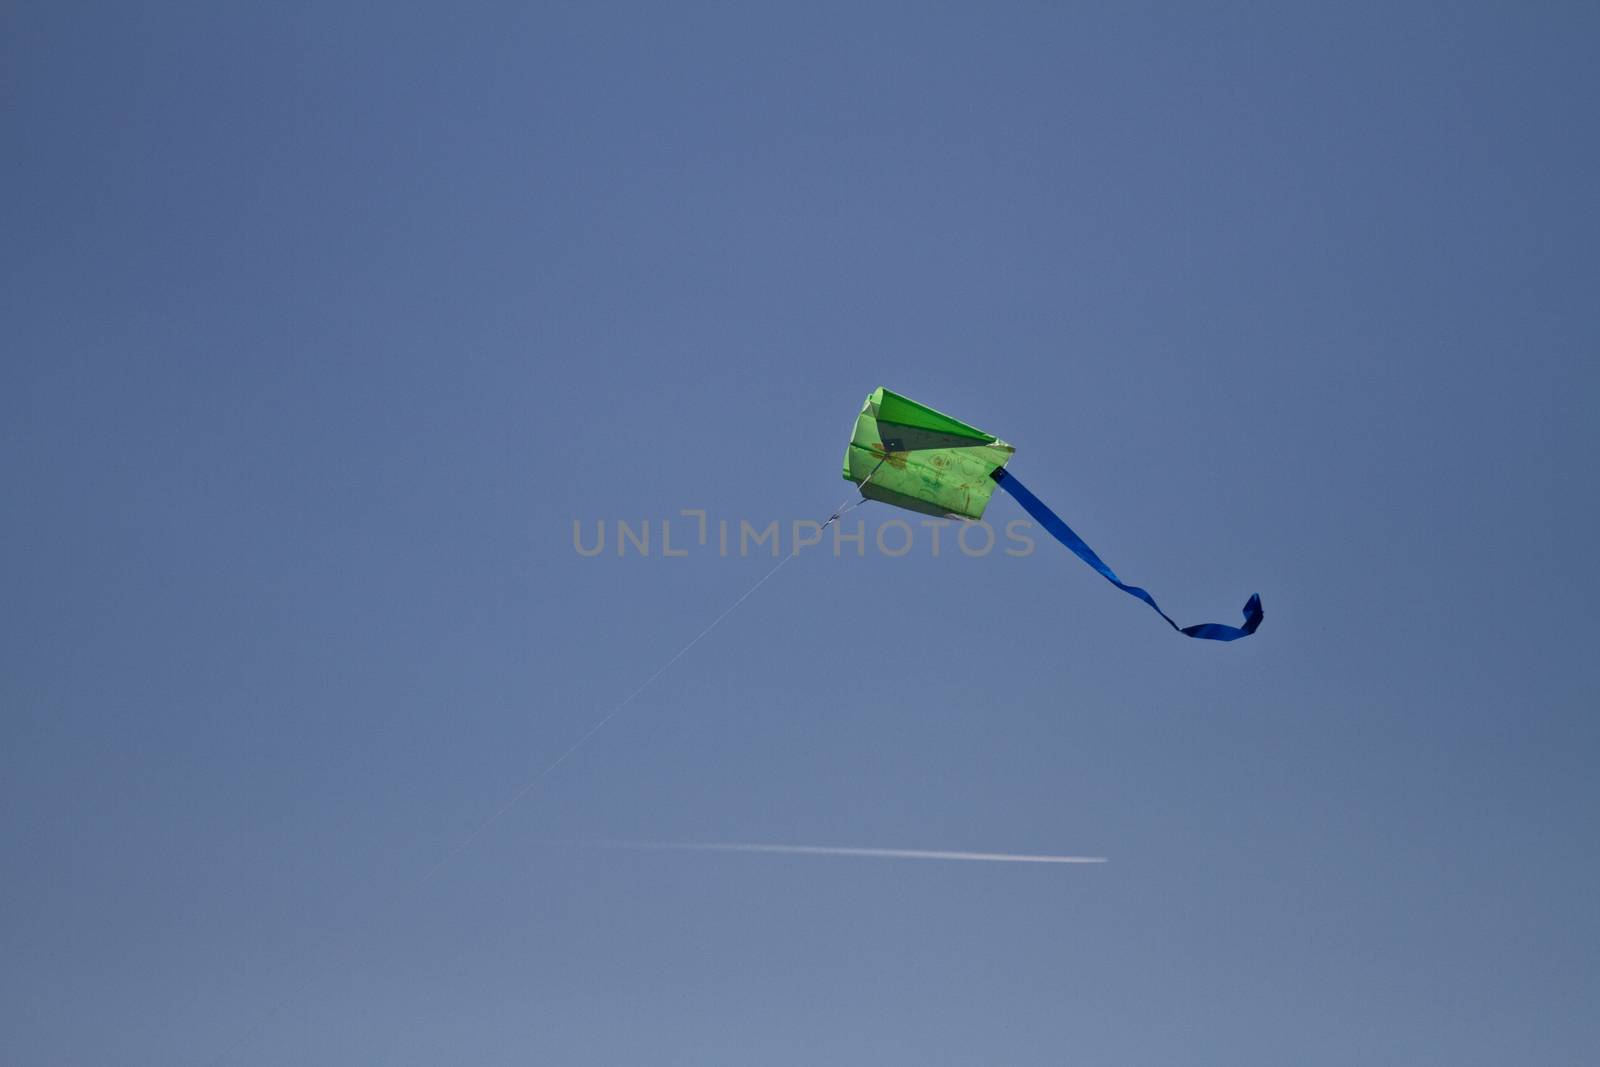 Flying a kite in the bright blue clear sky